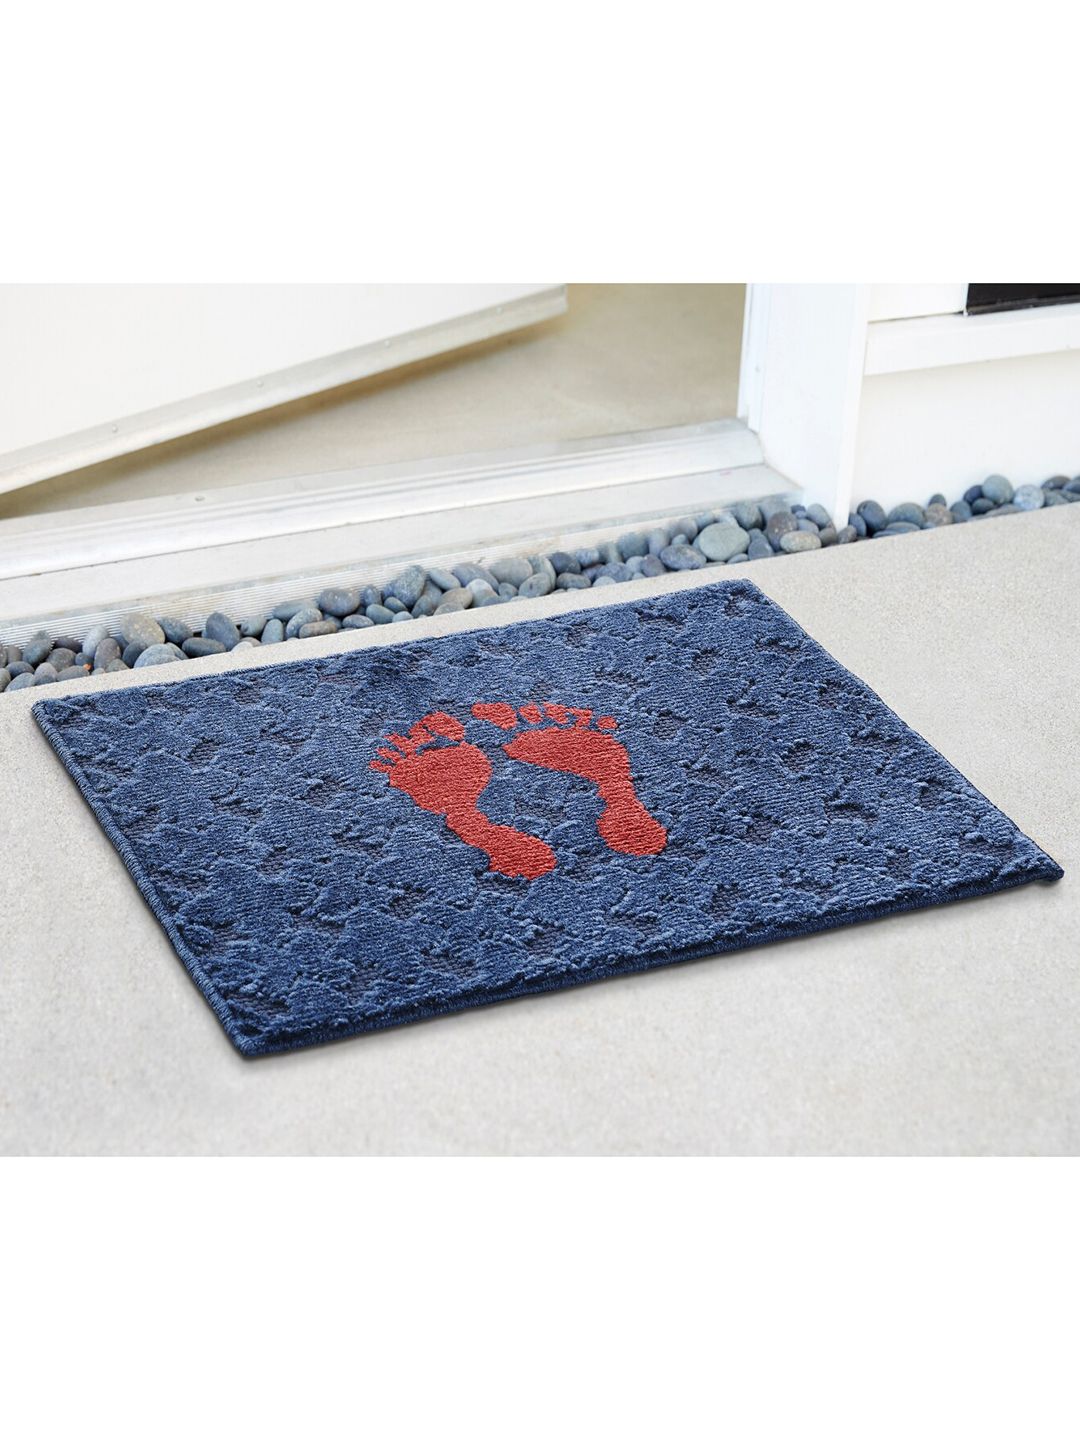 Saral Home Blue & Red Printed Cotton Anti-Skid Door Mat Price in India